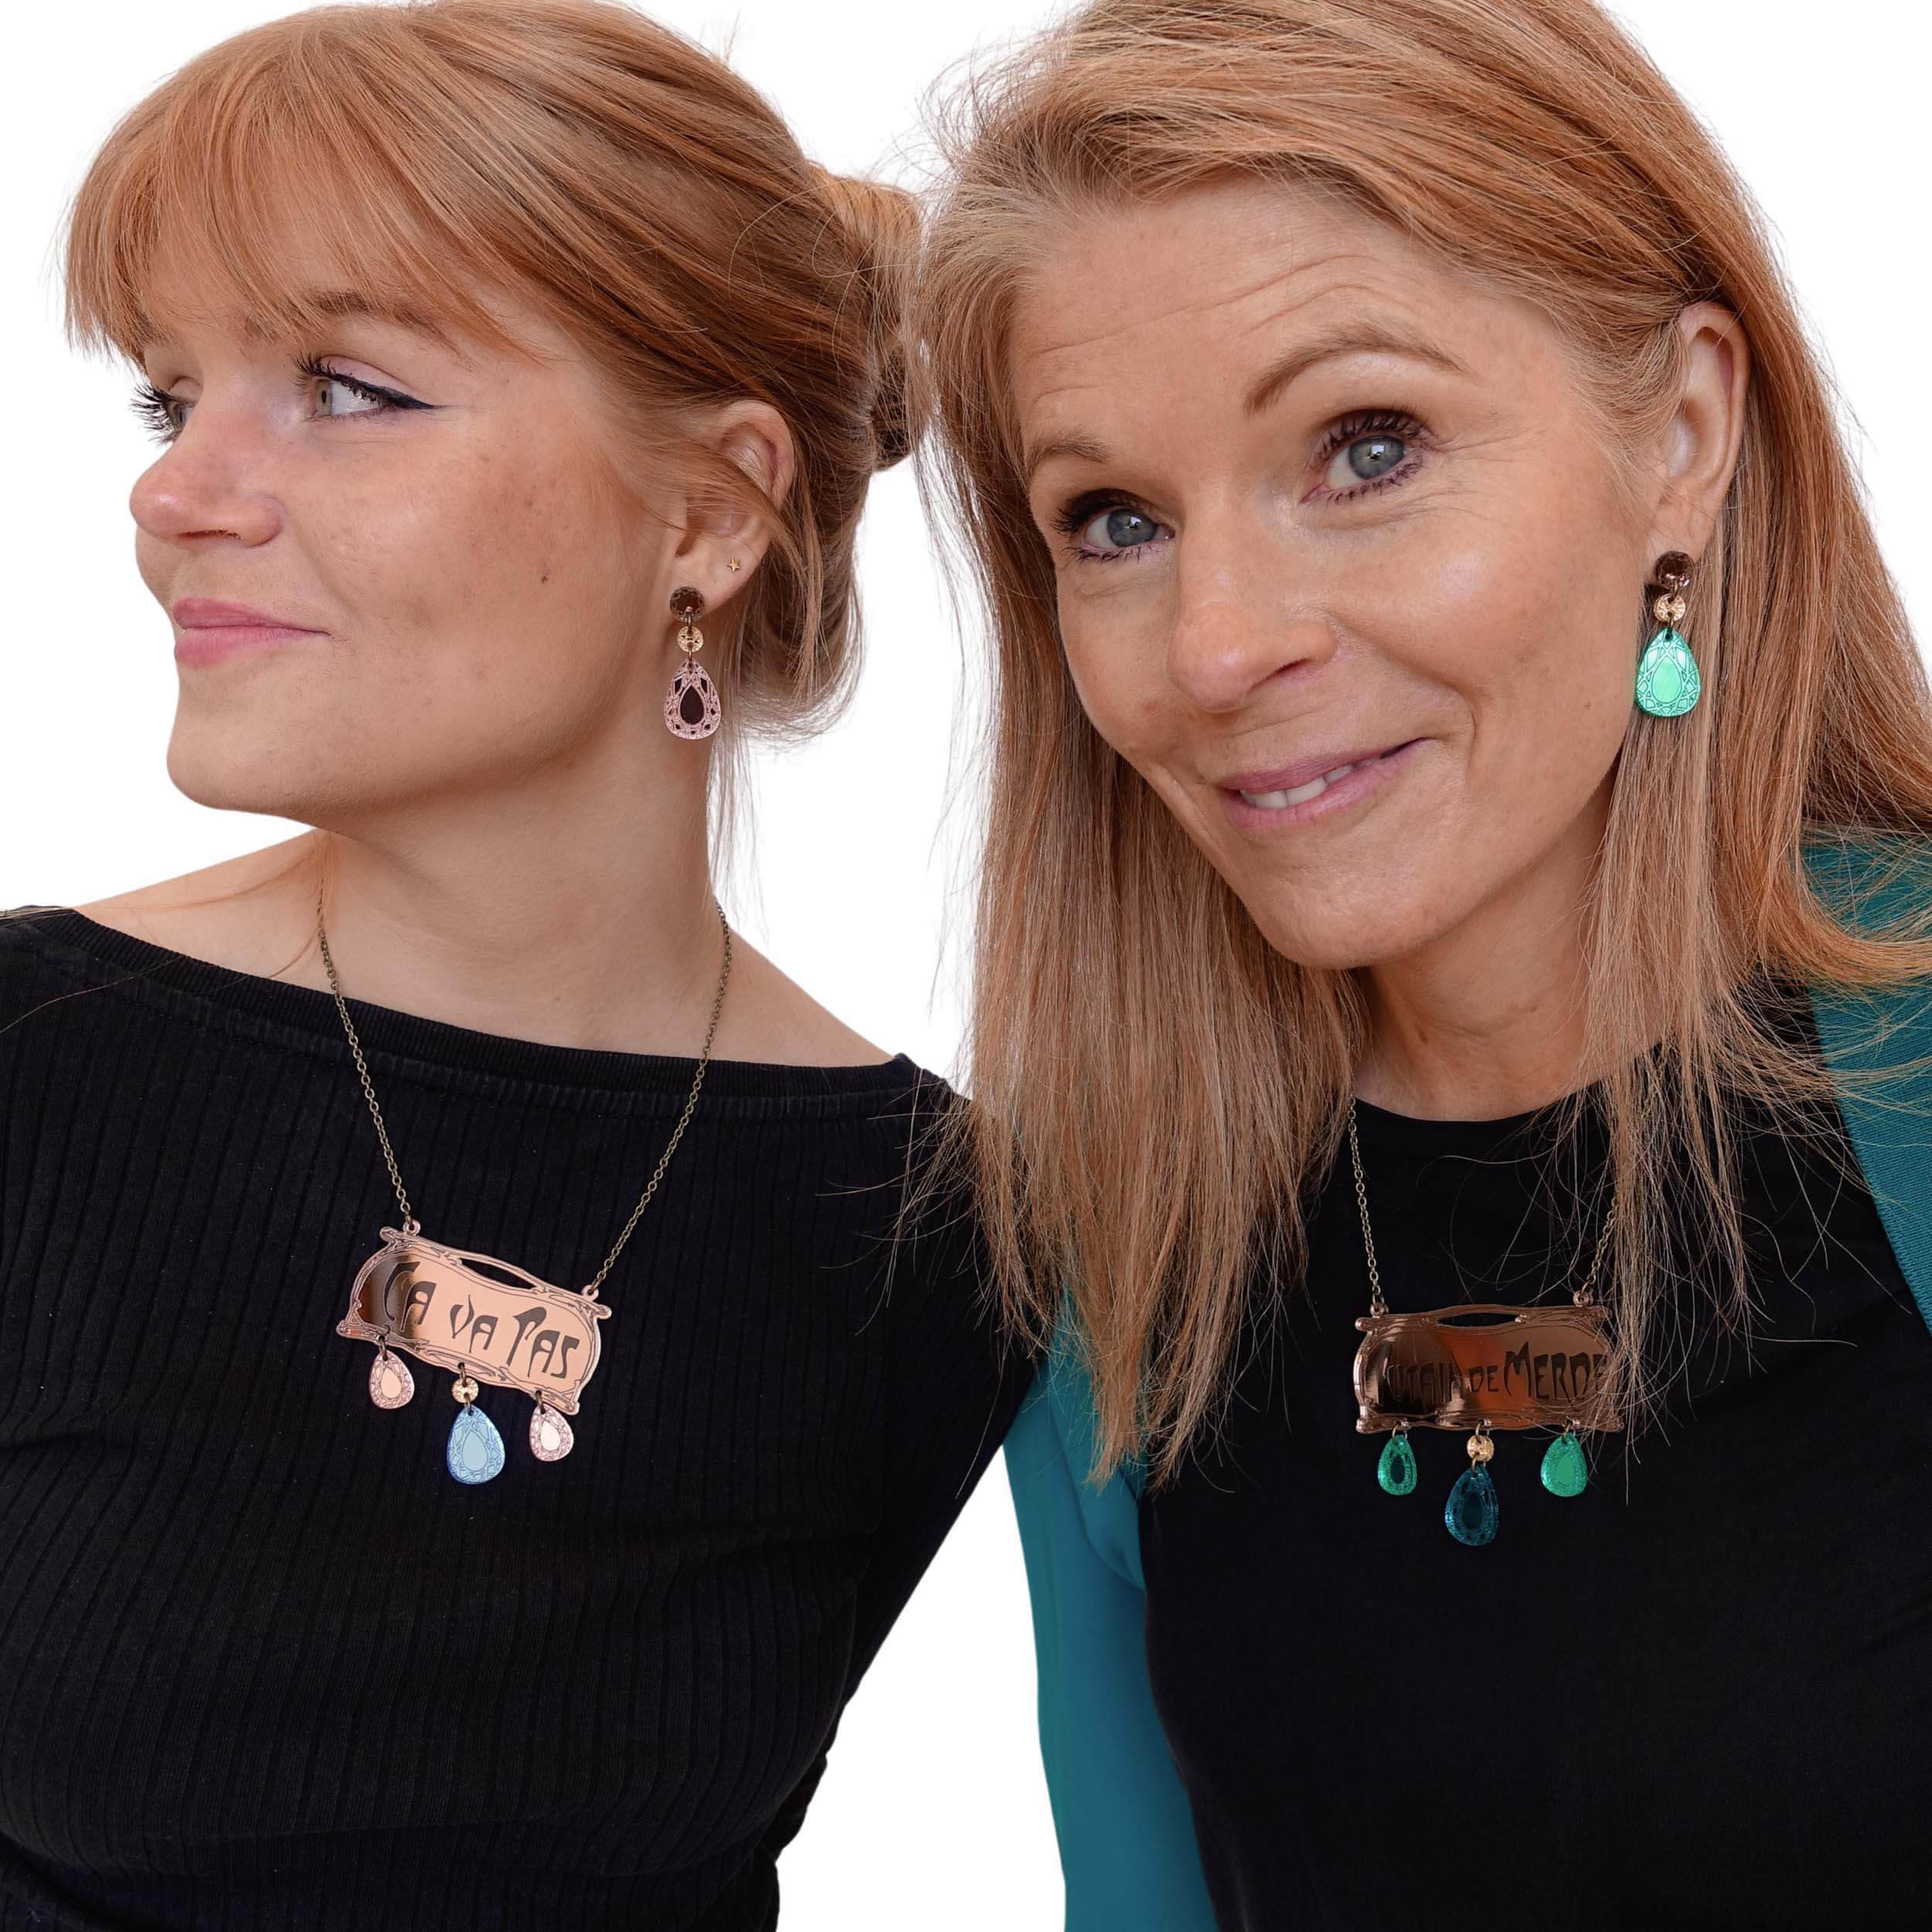 Eliza wearing the CA VA PAS necklace and rose gold Belle Epoque earrings while Sarah wears the French sweary P*taine de M*rde necklace and matching electric green Belle Epoque French drop earrings. £2 goes to Women for Refugee Women.  